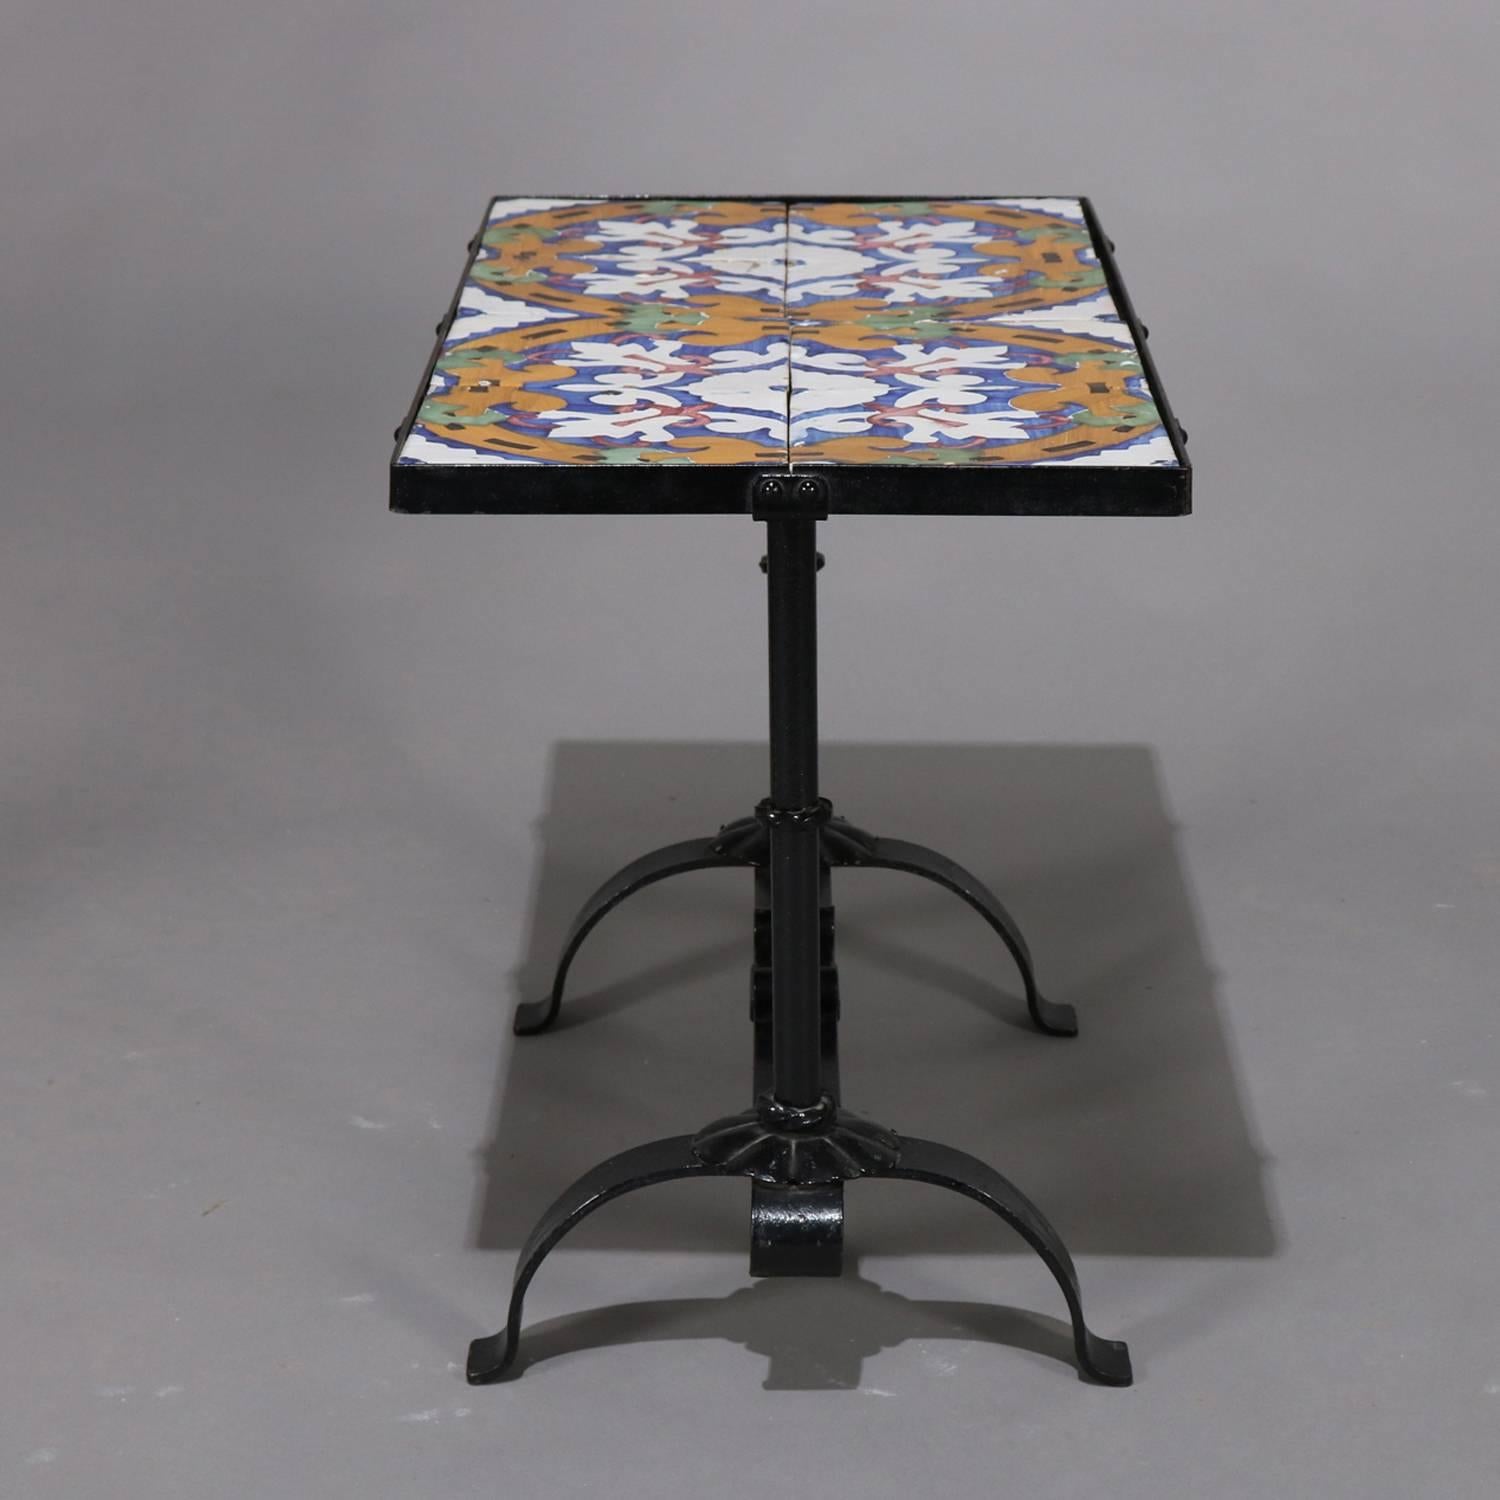 20th Century Arts & Crafts Yellin School Wrought Iron and Enameled California Tile Table